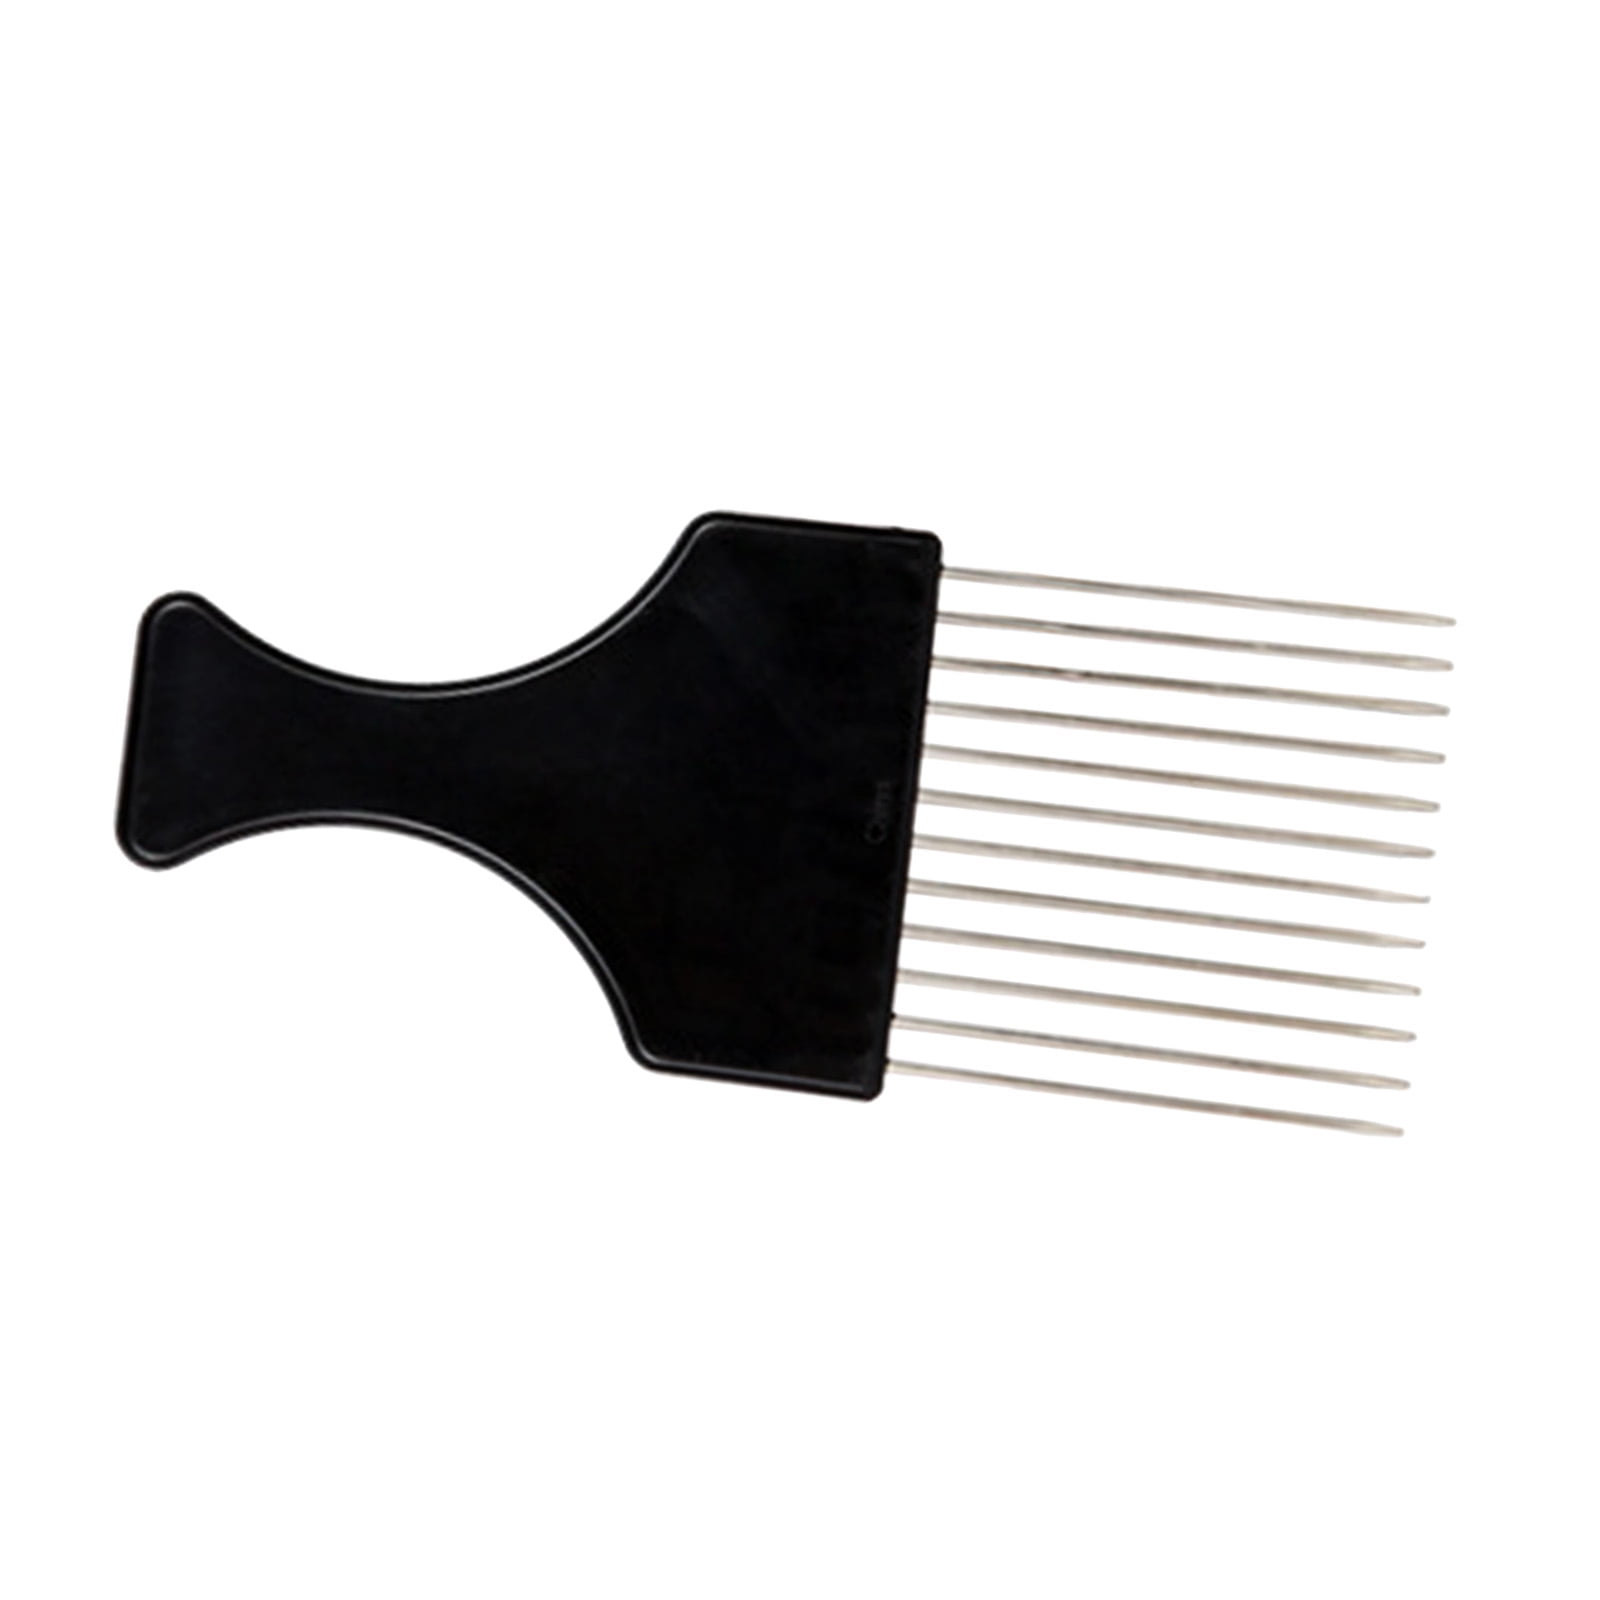 Afro Combs, Metal Afro African American Pick Comb Brush Hairdressing ...